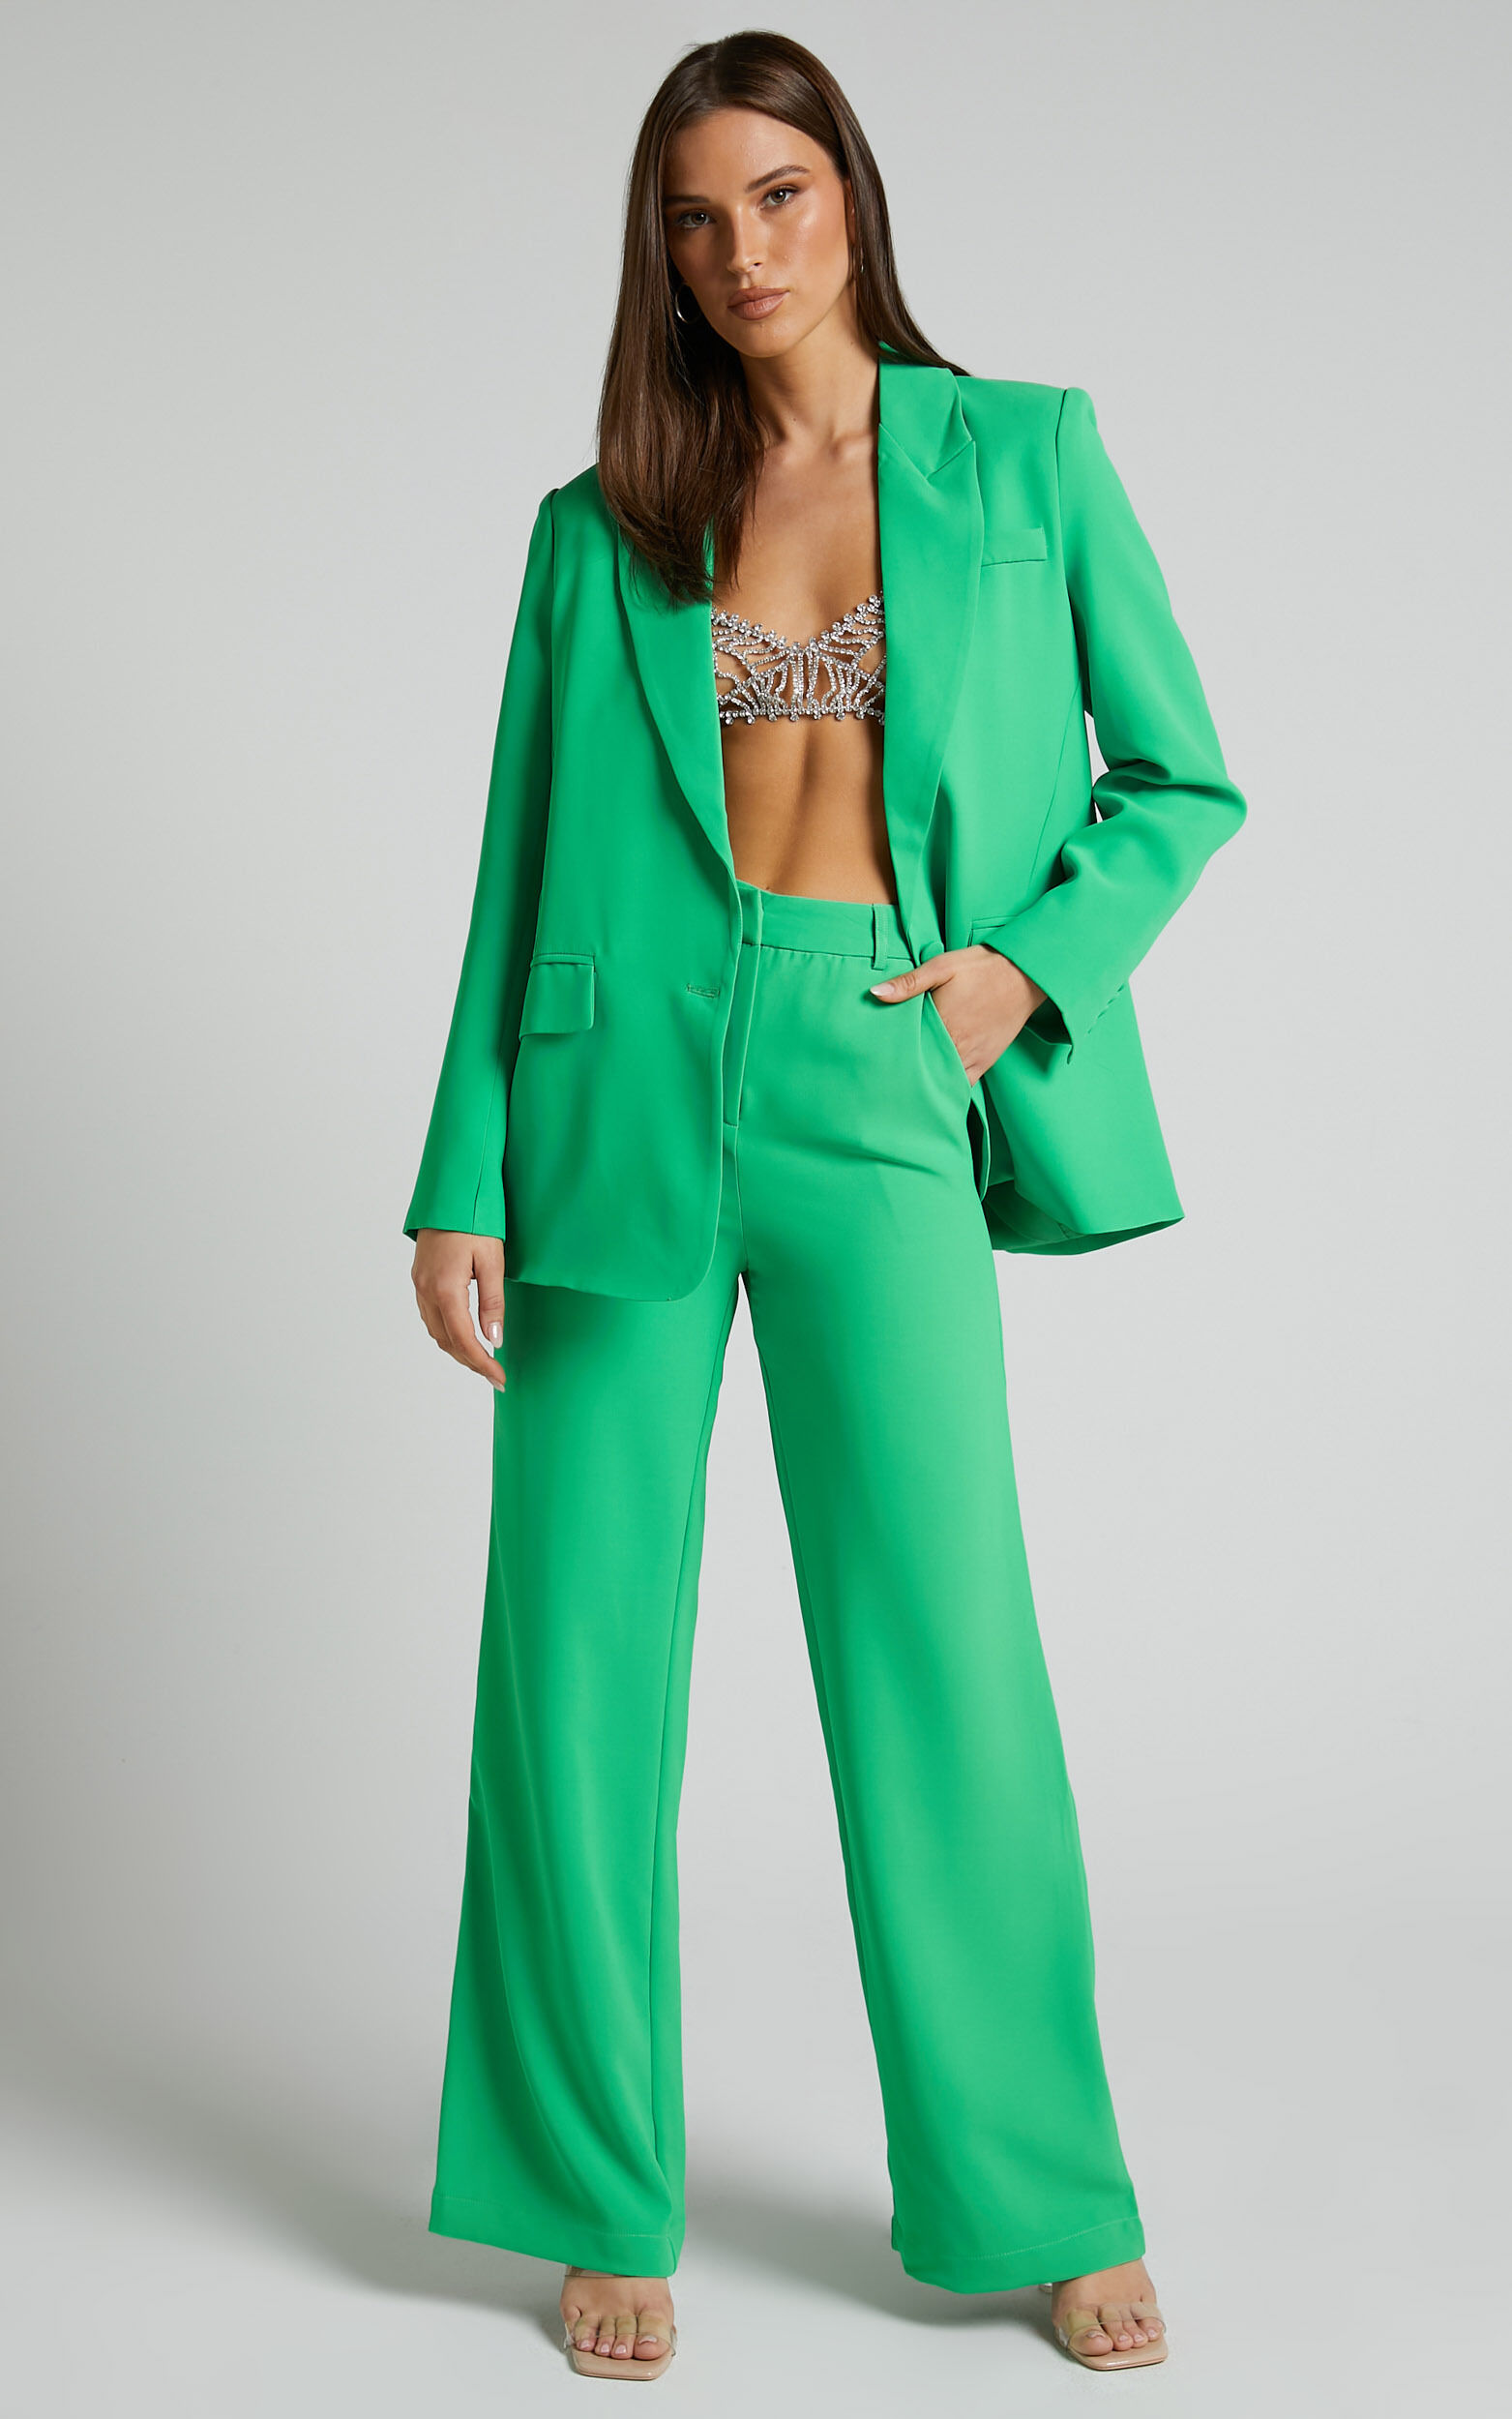 Draped Satin Tailored Trousers